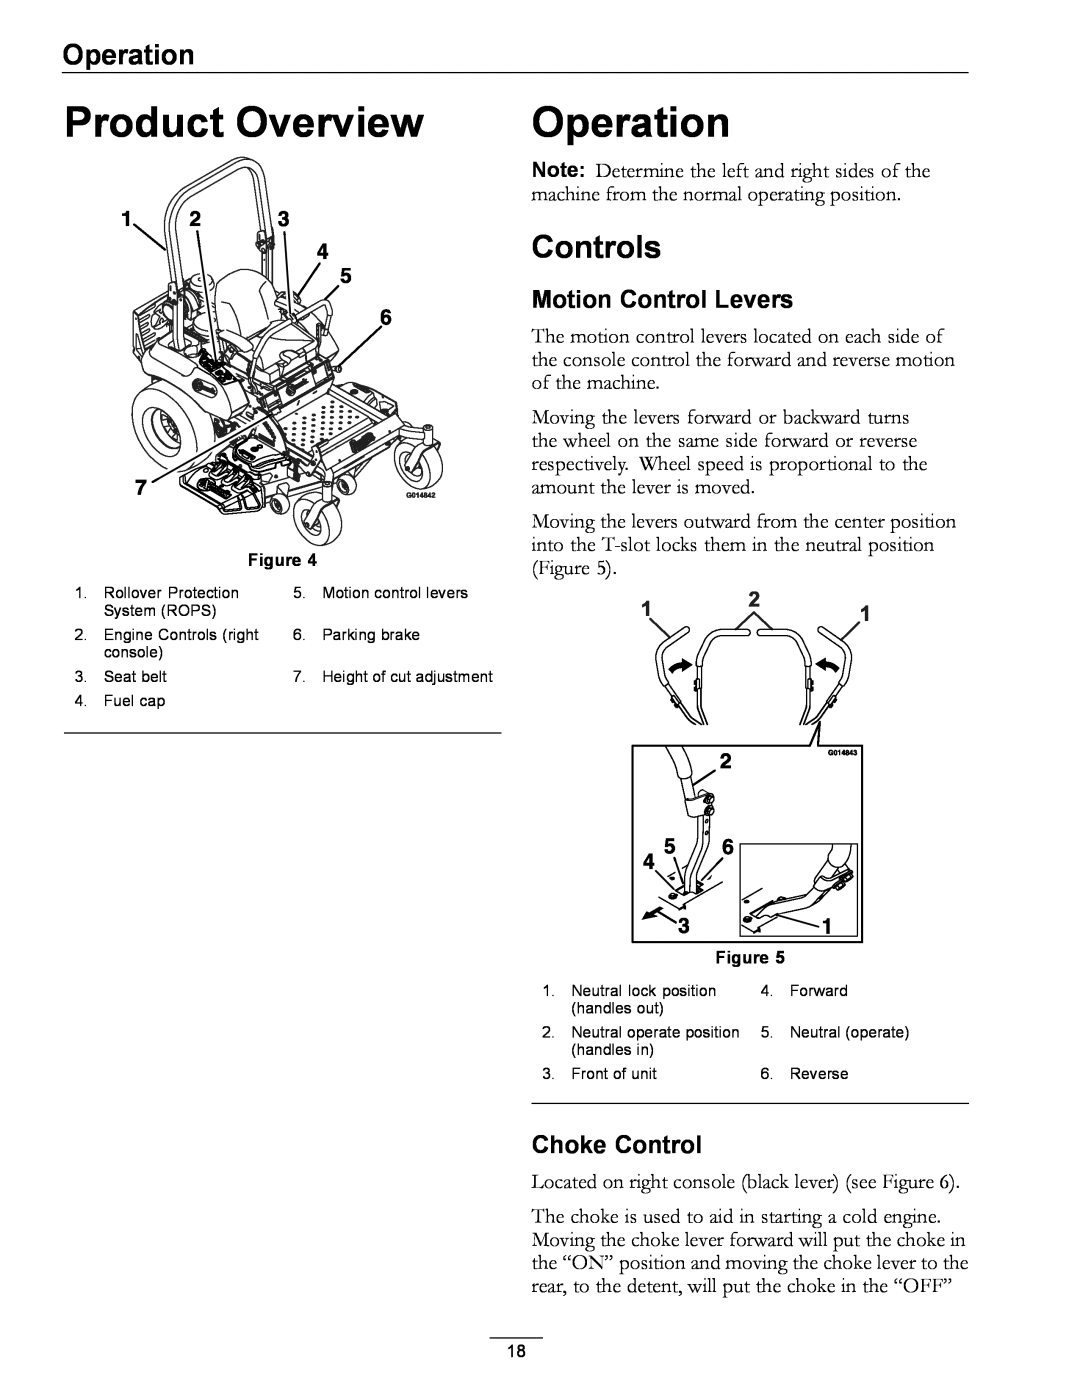 Exmark 920 manual Product Overview, Operation, Controls, Motion Control Levers, Choke Control 